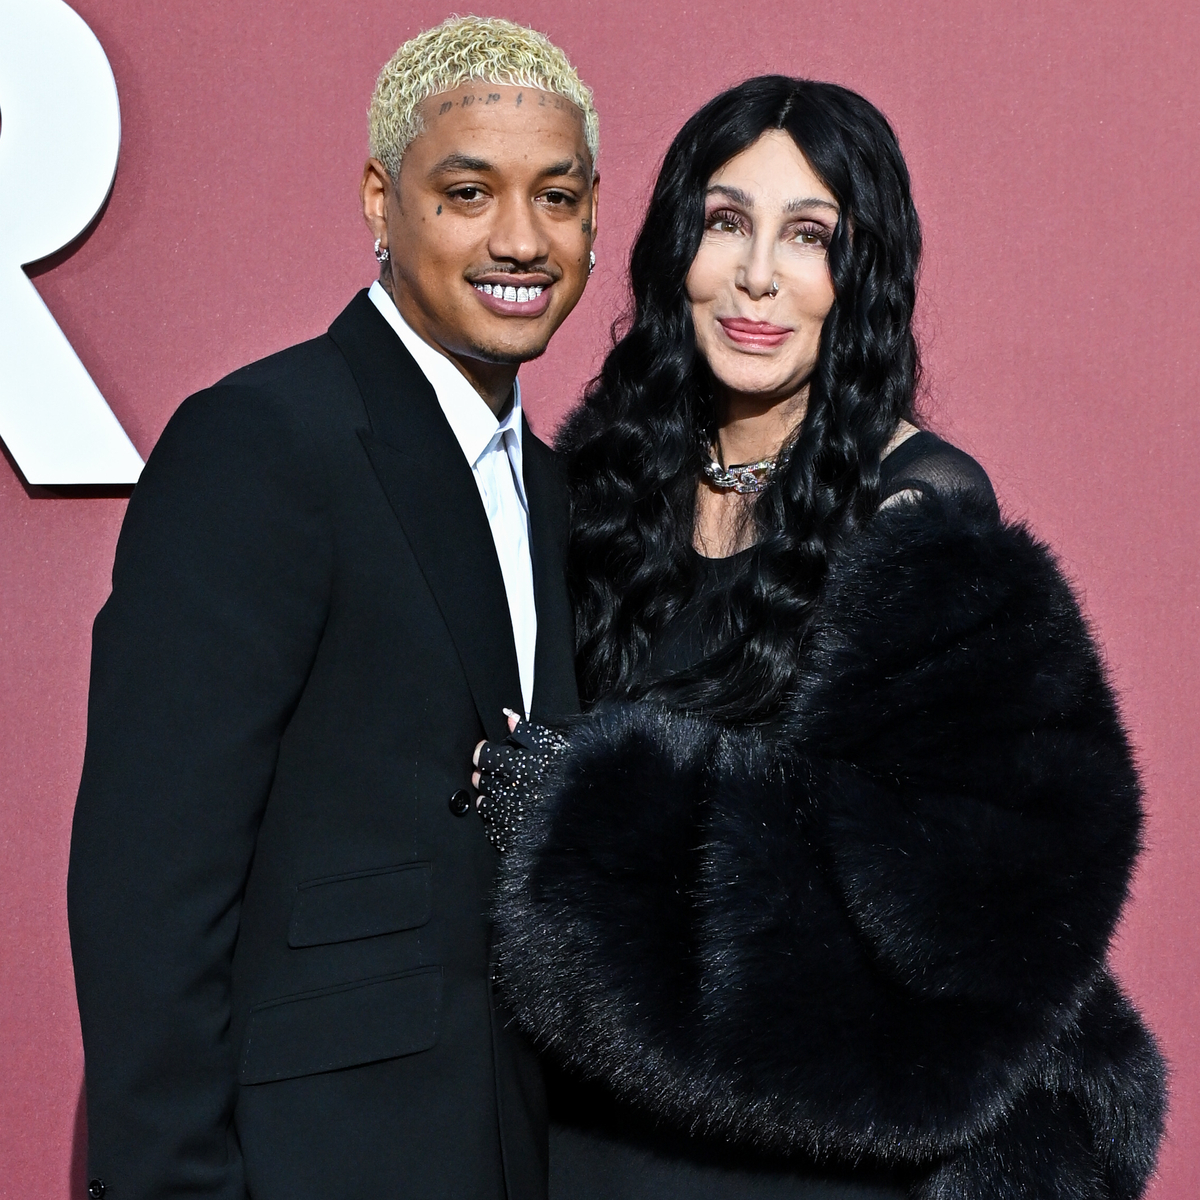 The Extravagant Way Cher and Alexander Edwards…